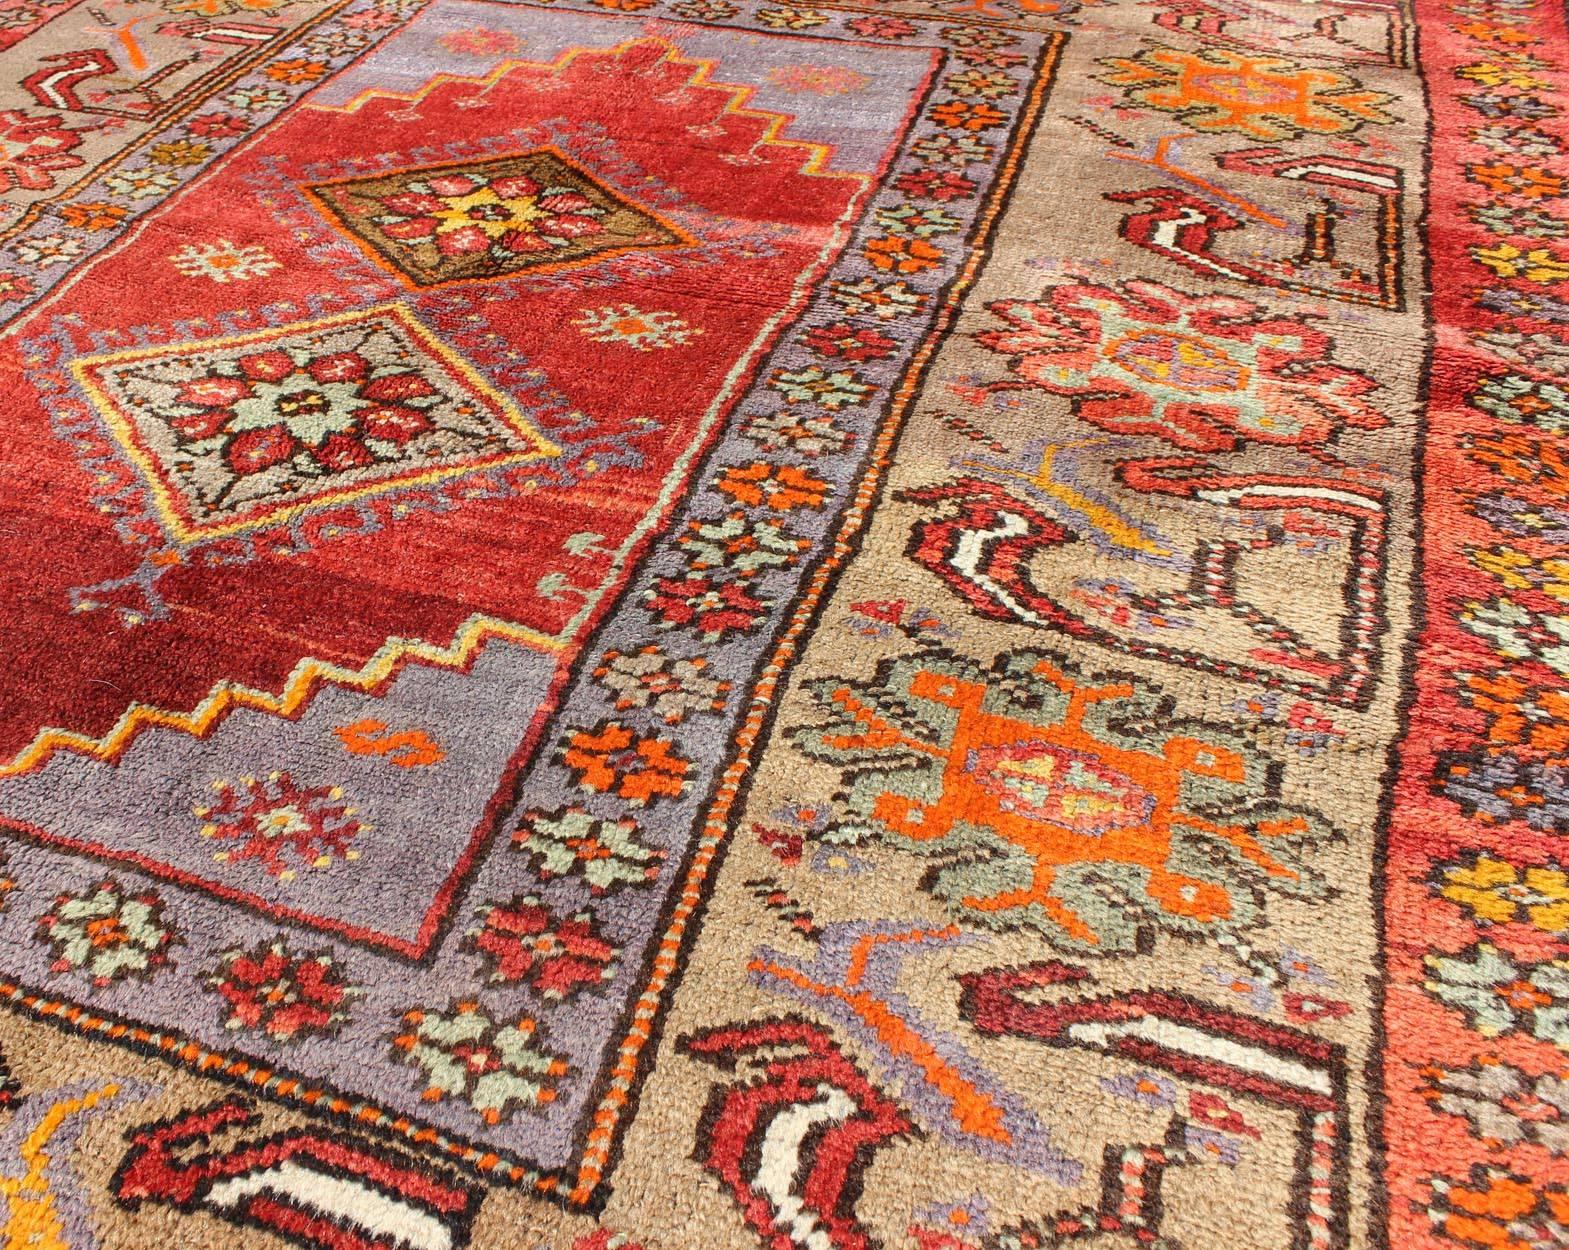 Colorful Antique Oushak Square Rug with Geometric Medallions & Floral Border In Excellent Condition For Sale In Atlanta, GA